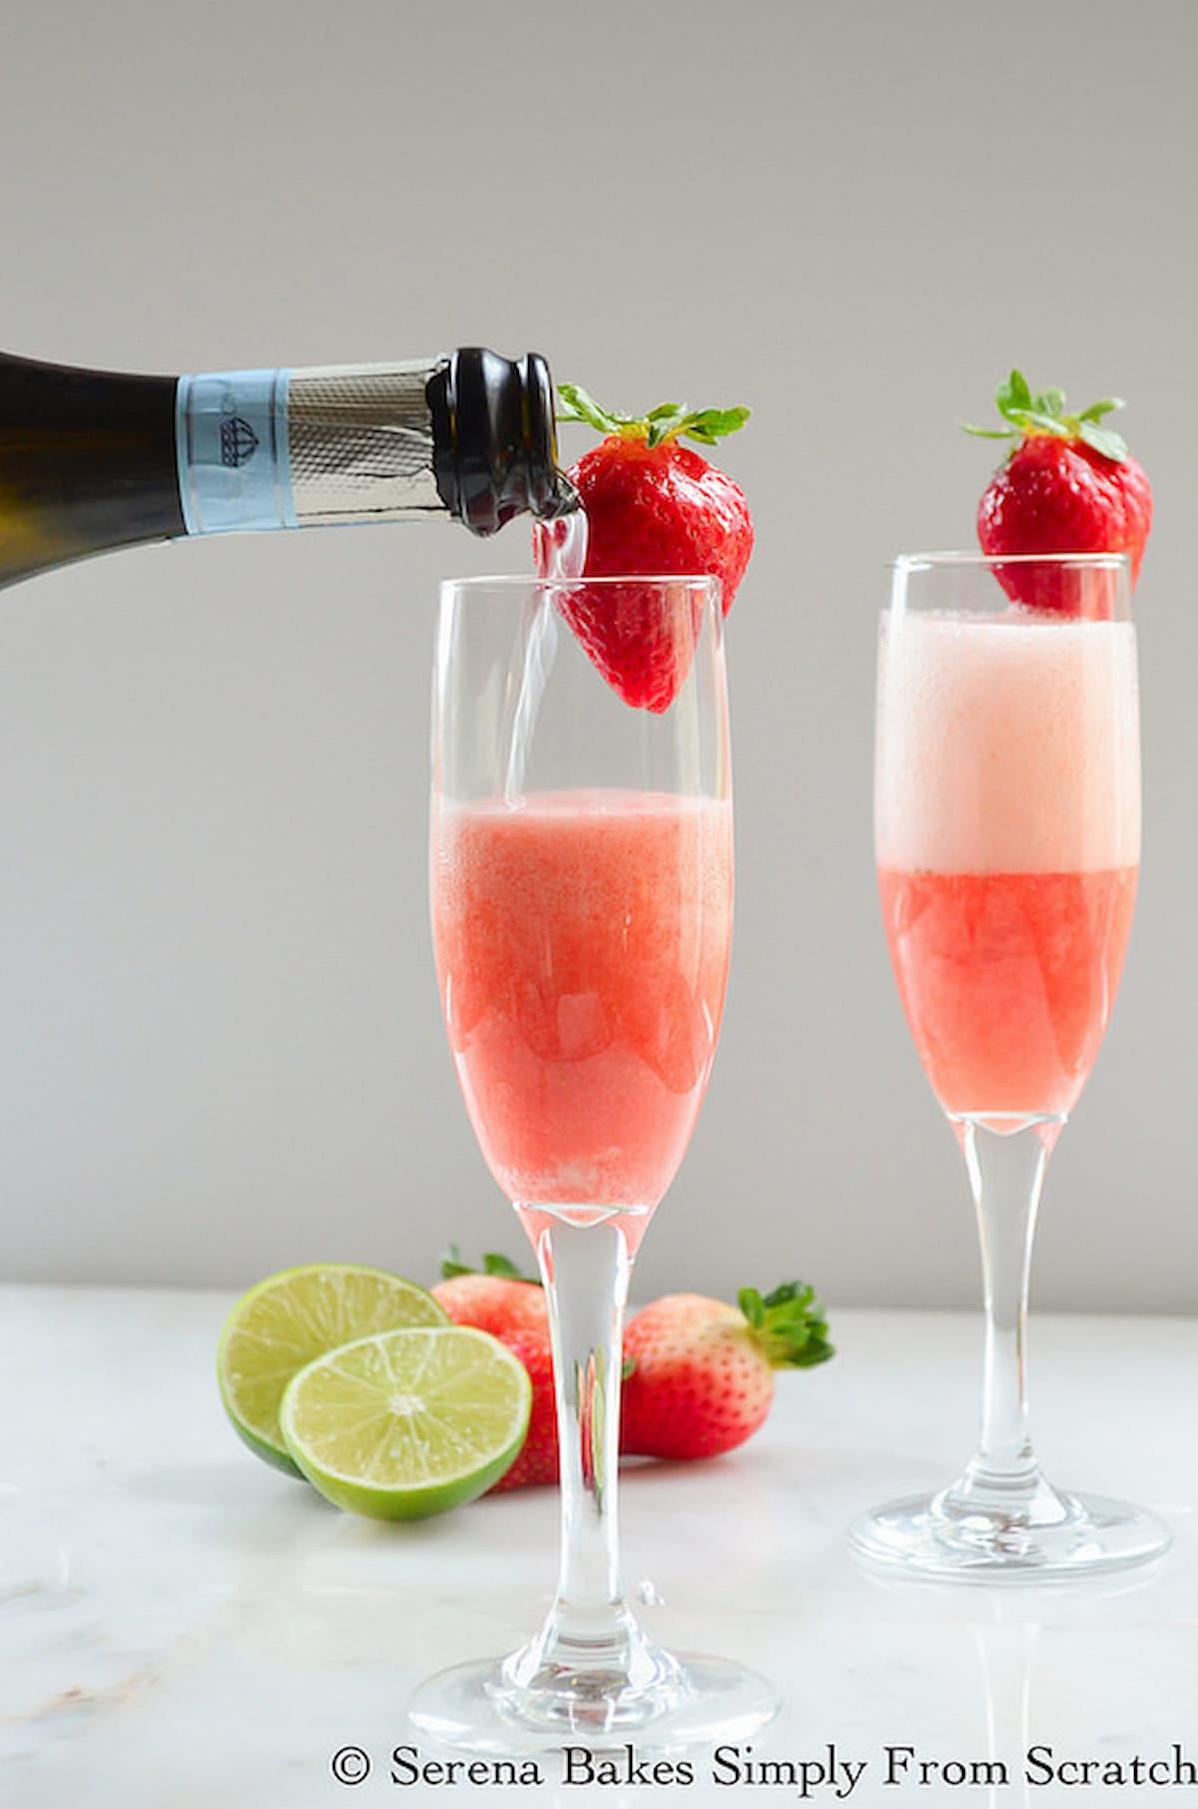  Take a sip of luxury with this easy-to-make Strawberry Champagne. 💎